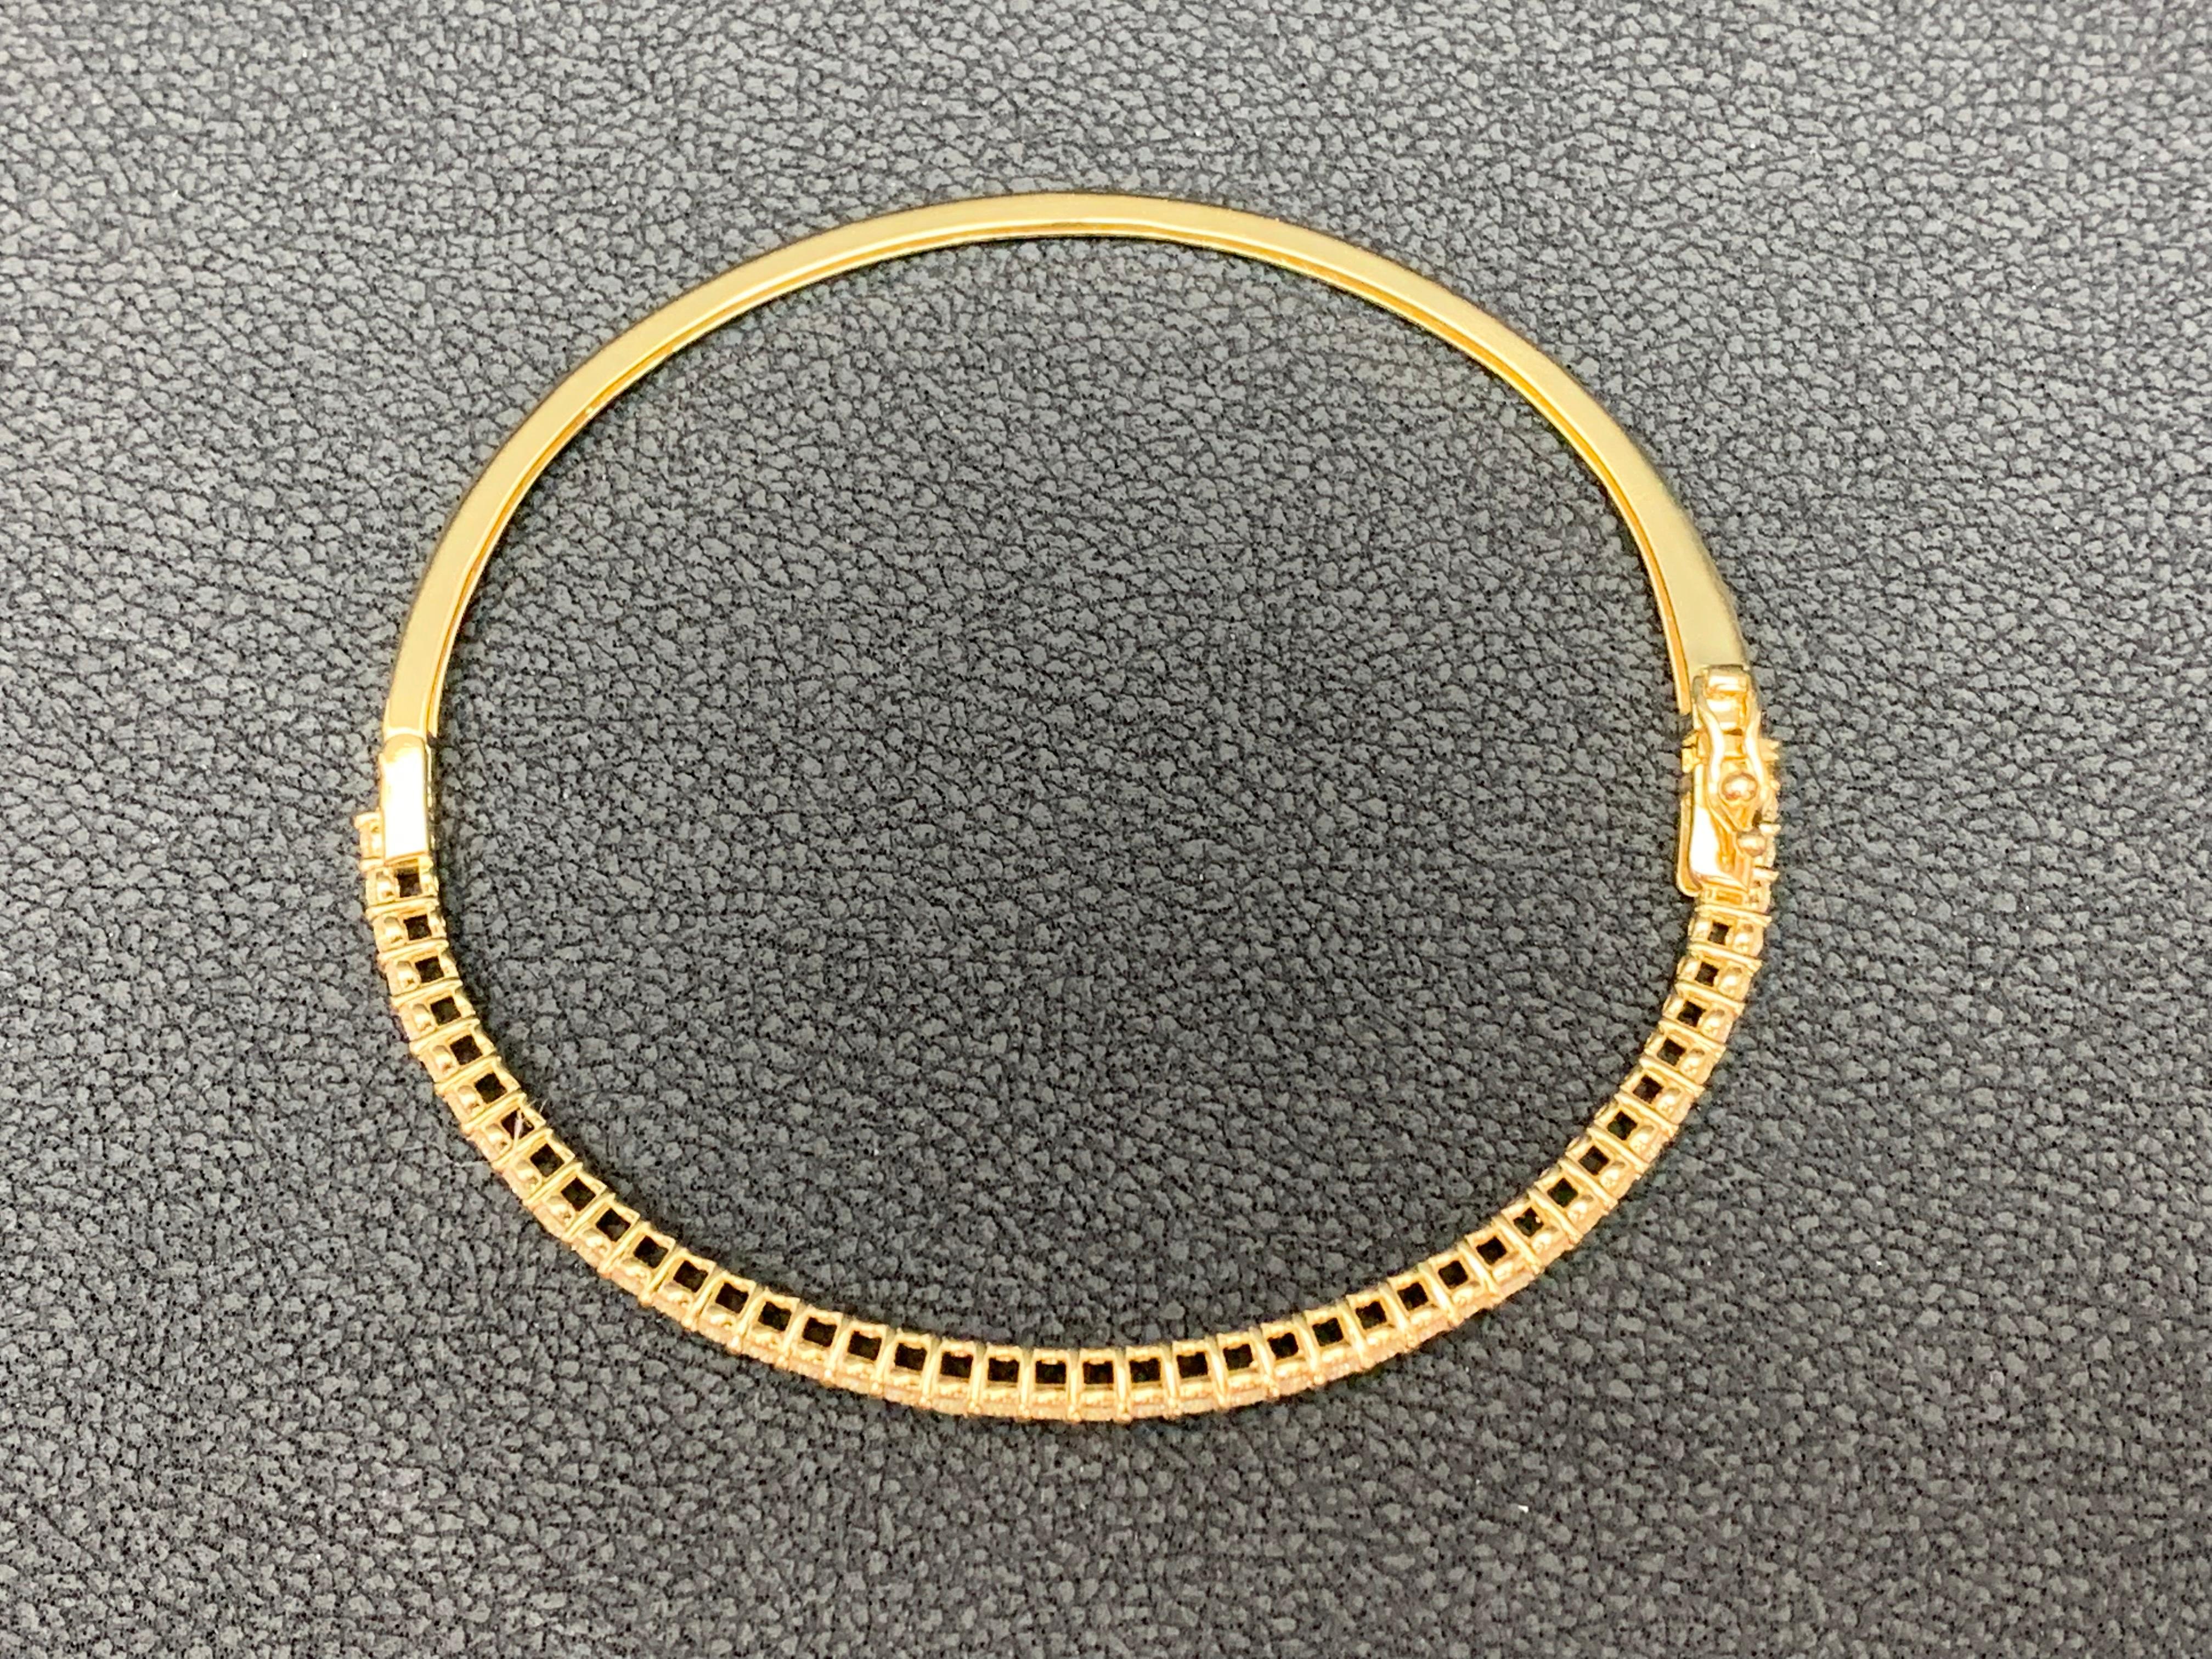 1.01 Carat Round Cut Diamond Yellow Gold Bangle Bracelet in 14K Yellow Gold For Sale 7